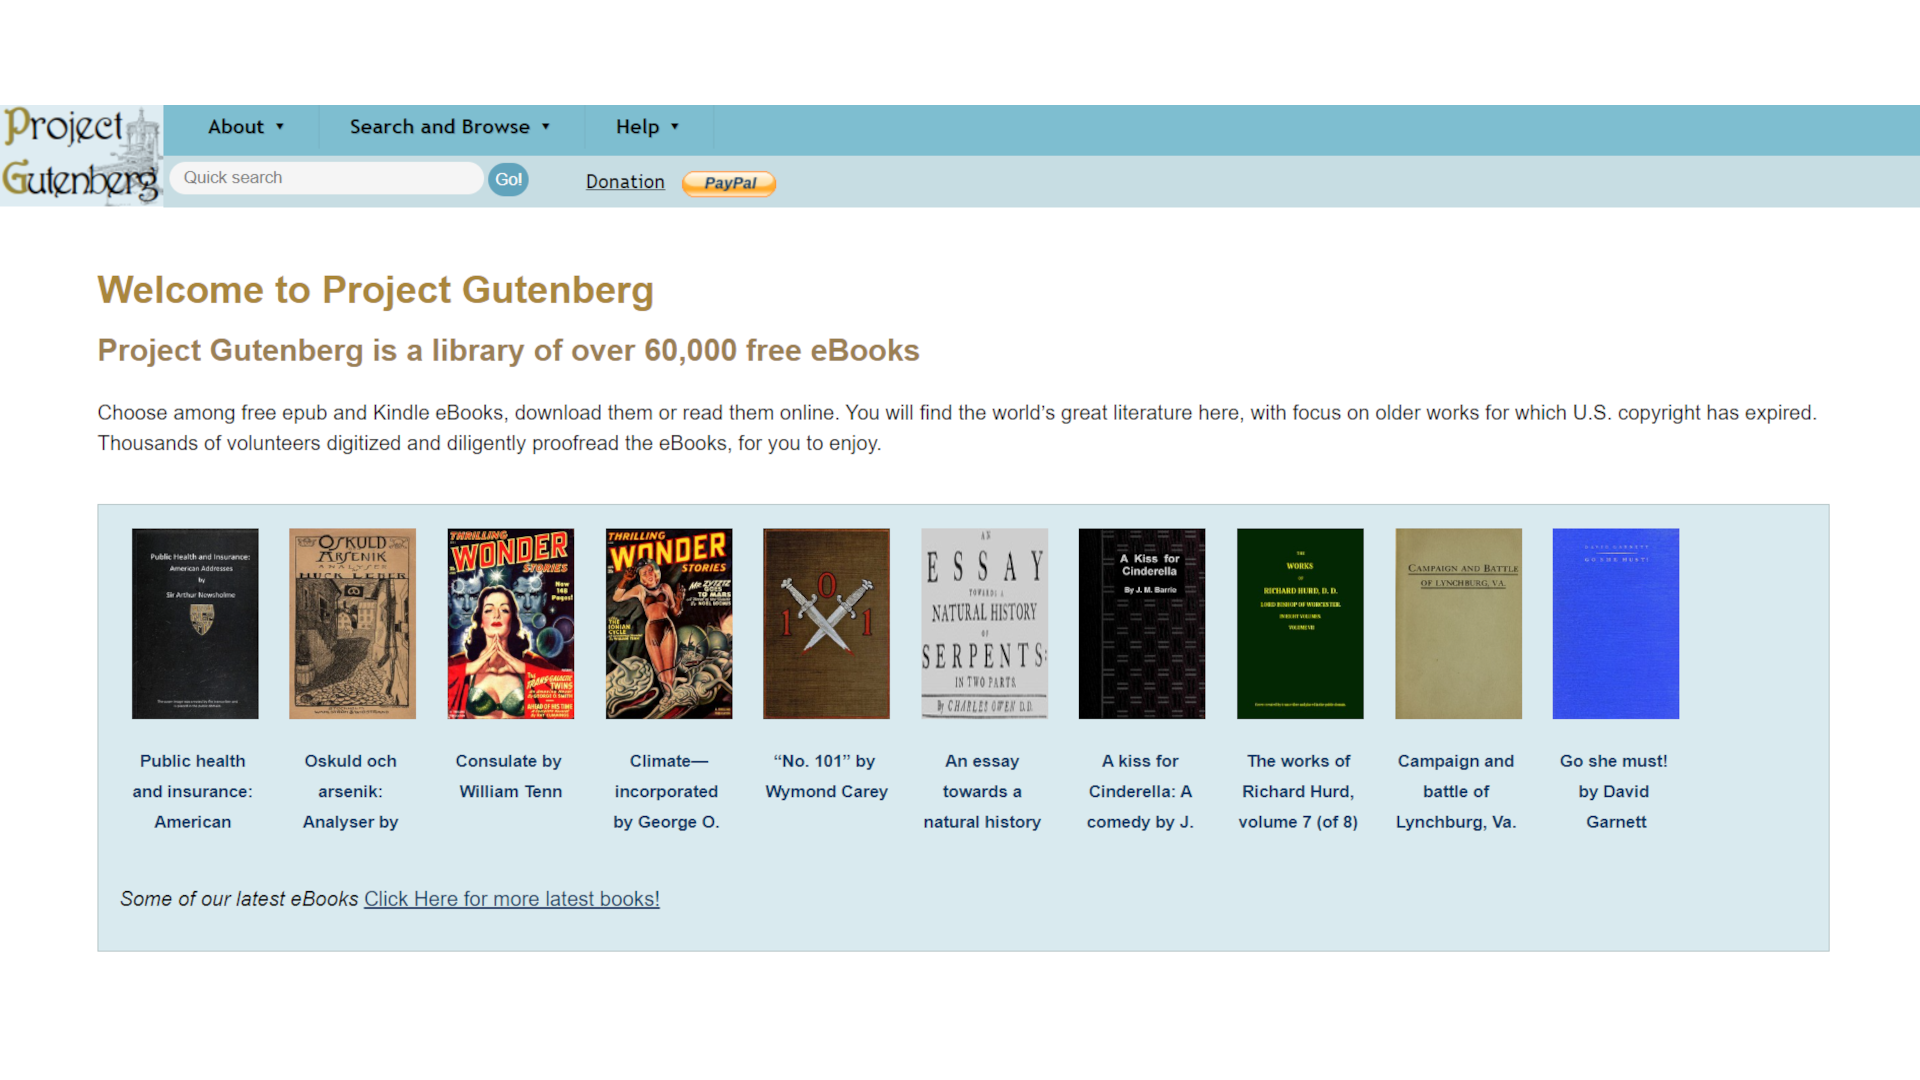 an image shows the Project Gutenberg homepage.